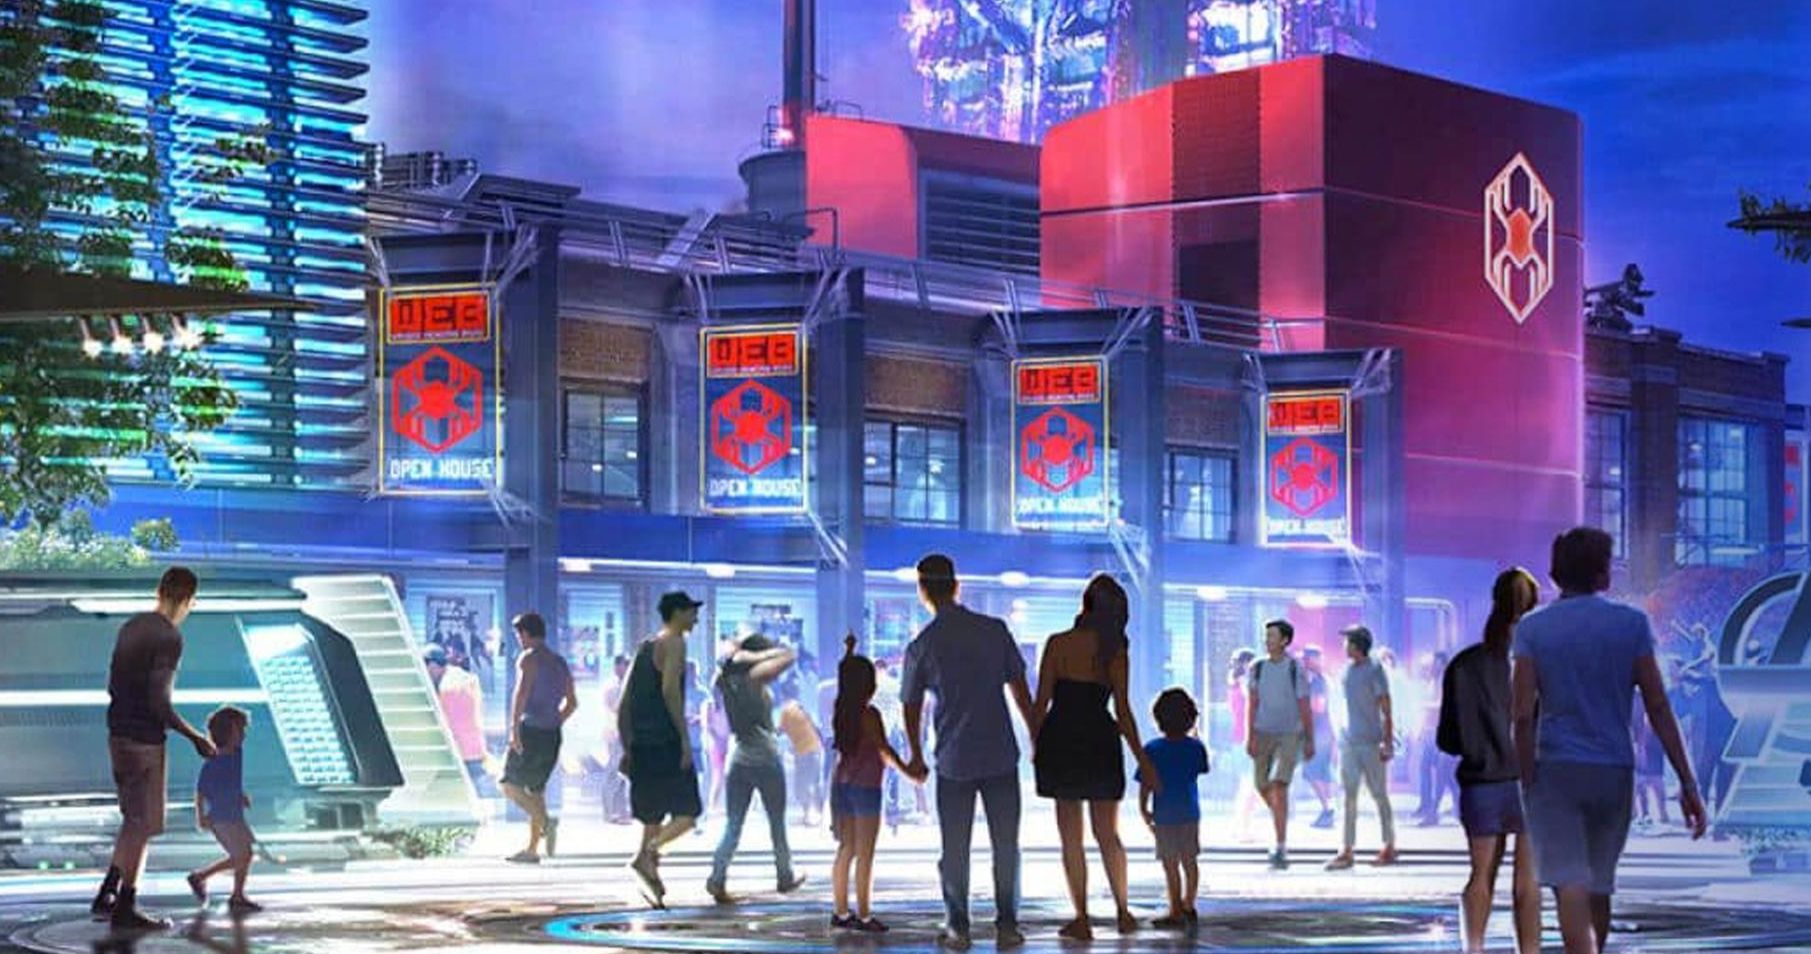 Marvel's Avengers Campus Will Officially Open at Disney California Adventure in 2021